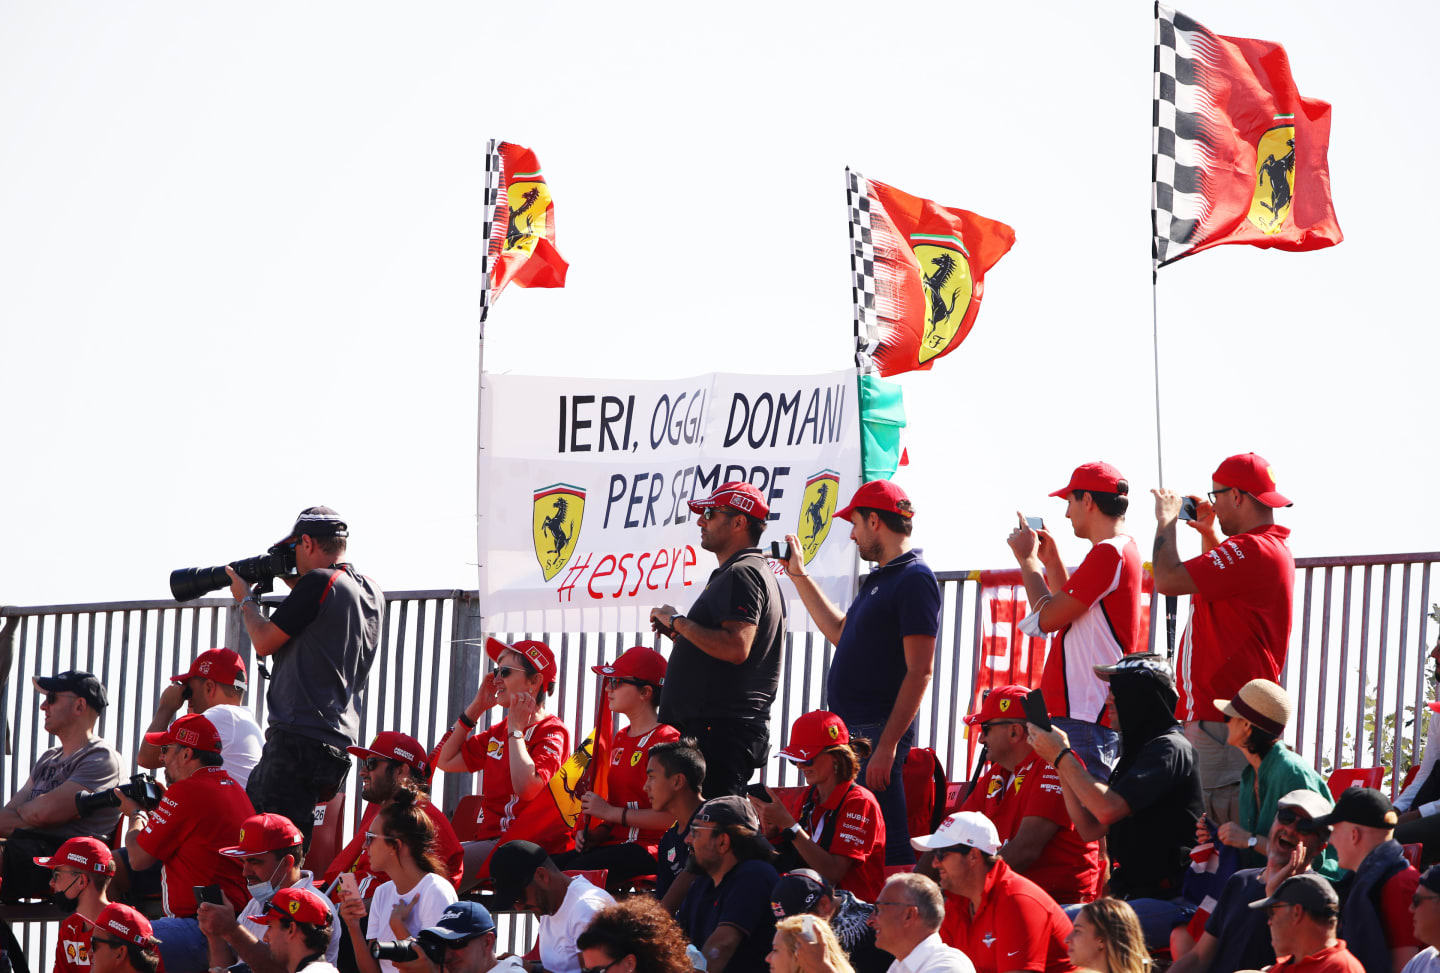 SCARPERIA, ITALY - SEPTEMBER 13: Scuderia Ferrari fans show their support from the stands before